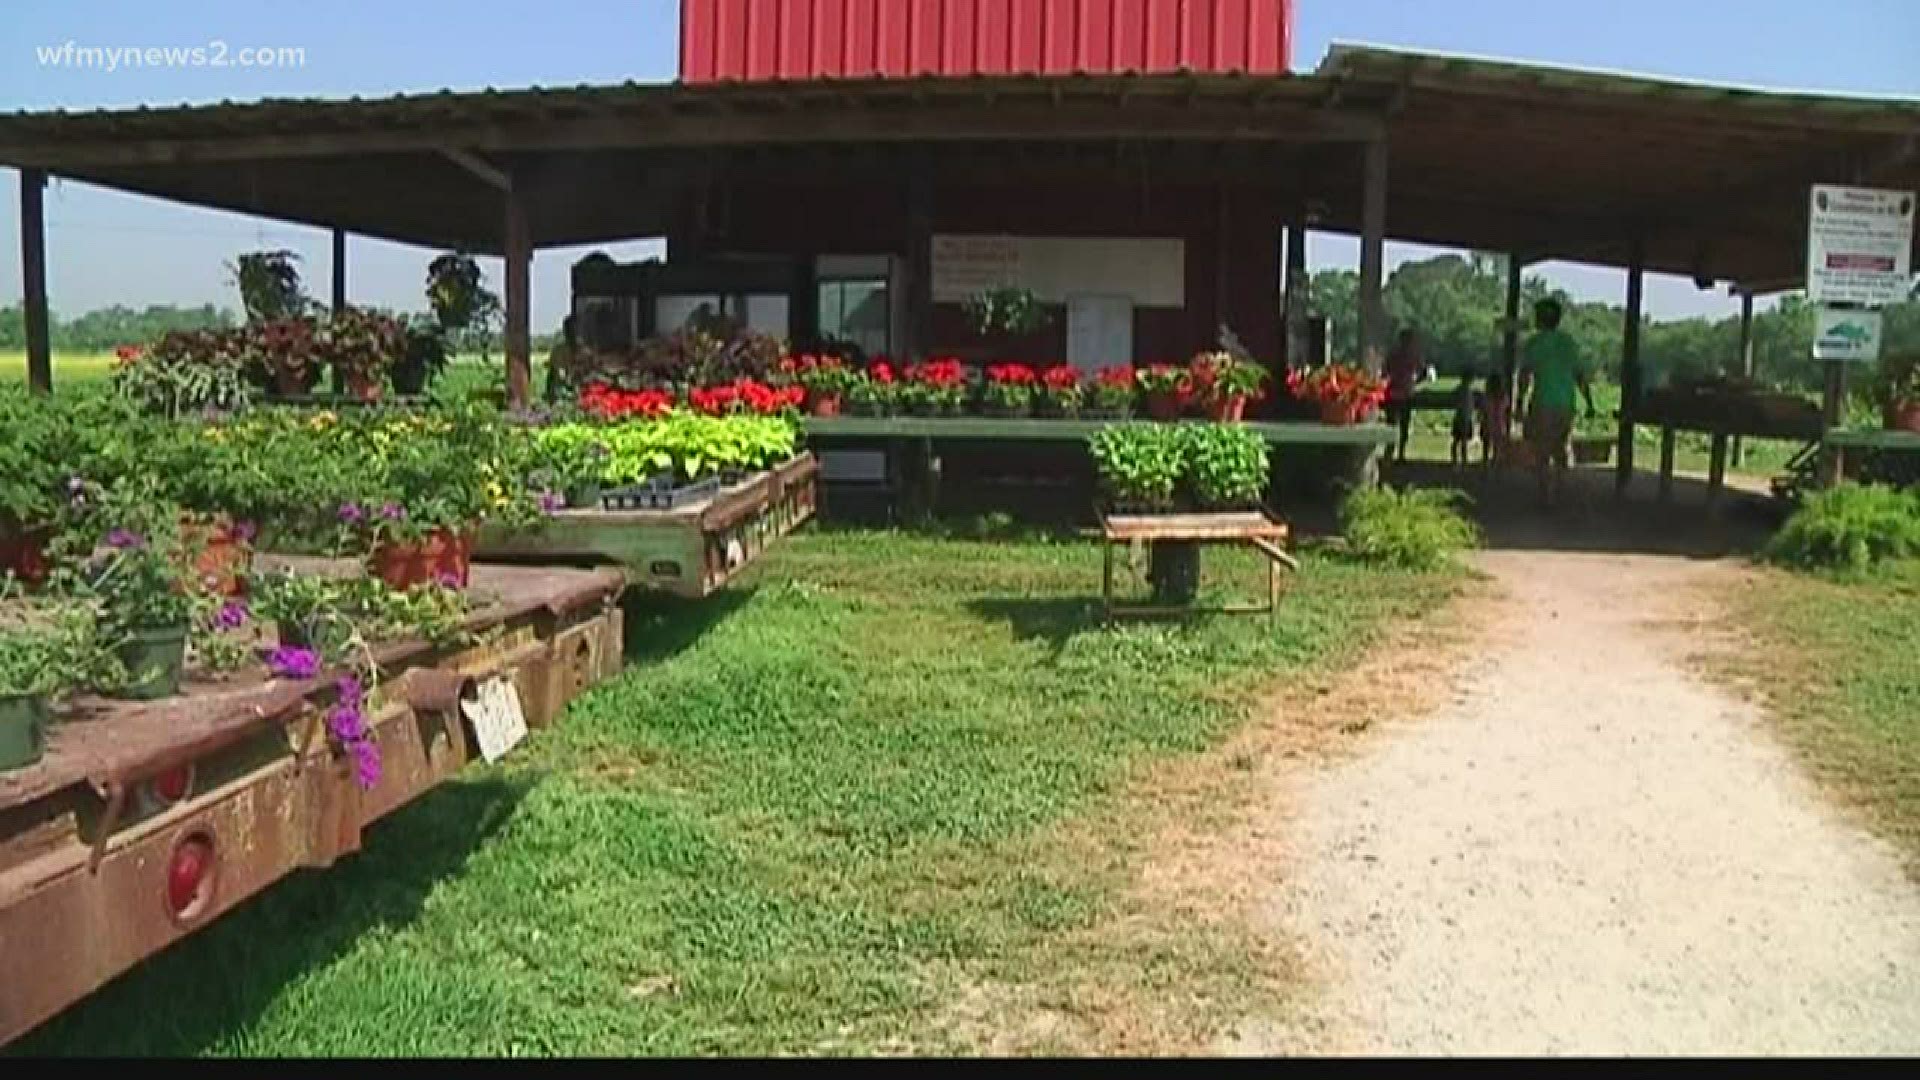 Rudd Farm’s usually does u-pick strawberries. This year, they’re doing drive-thru sales and the first sale sold out.